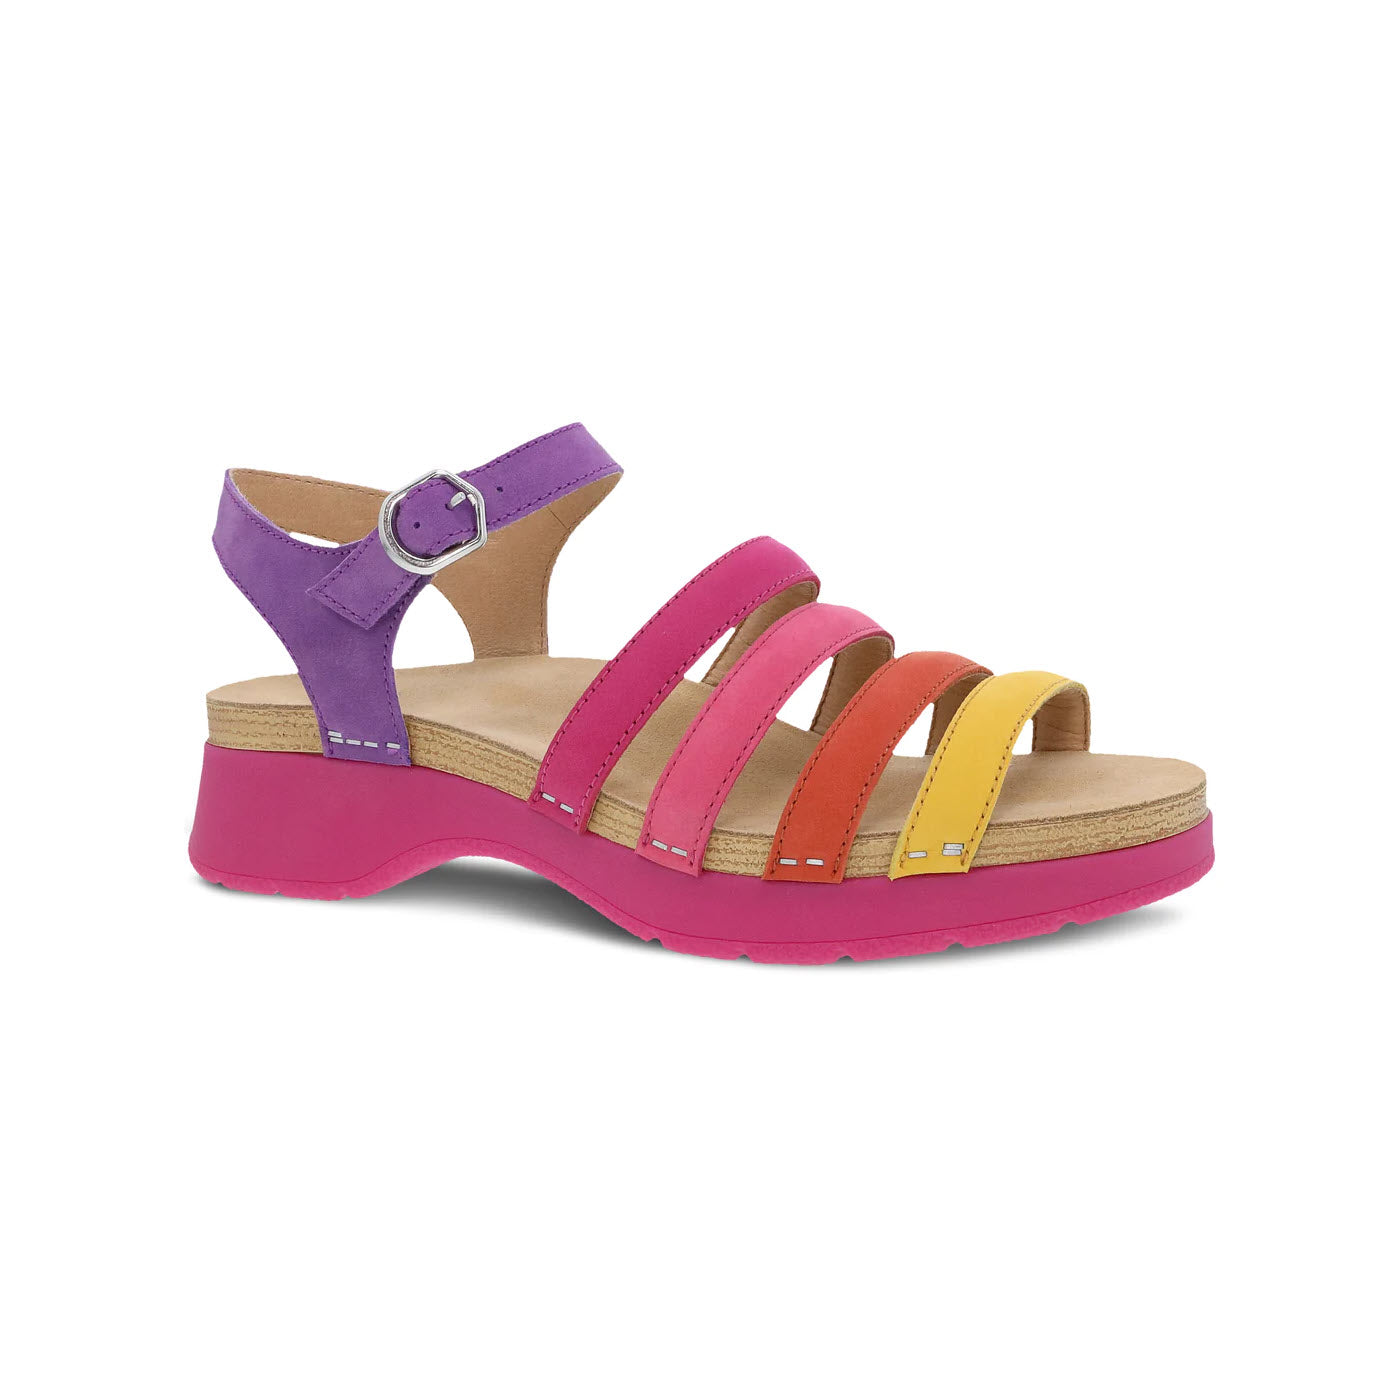 A colorful sandal with cute colors like purple, pink, red, orange, and yellow straps, featuring a chunky heel and a side buckle. Try the Dansko Roxie Multi - Womens.